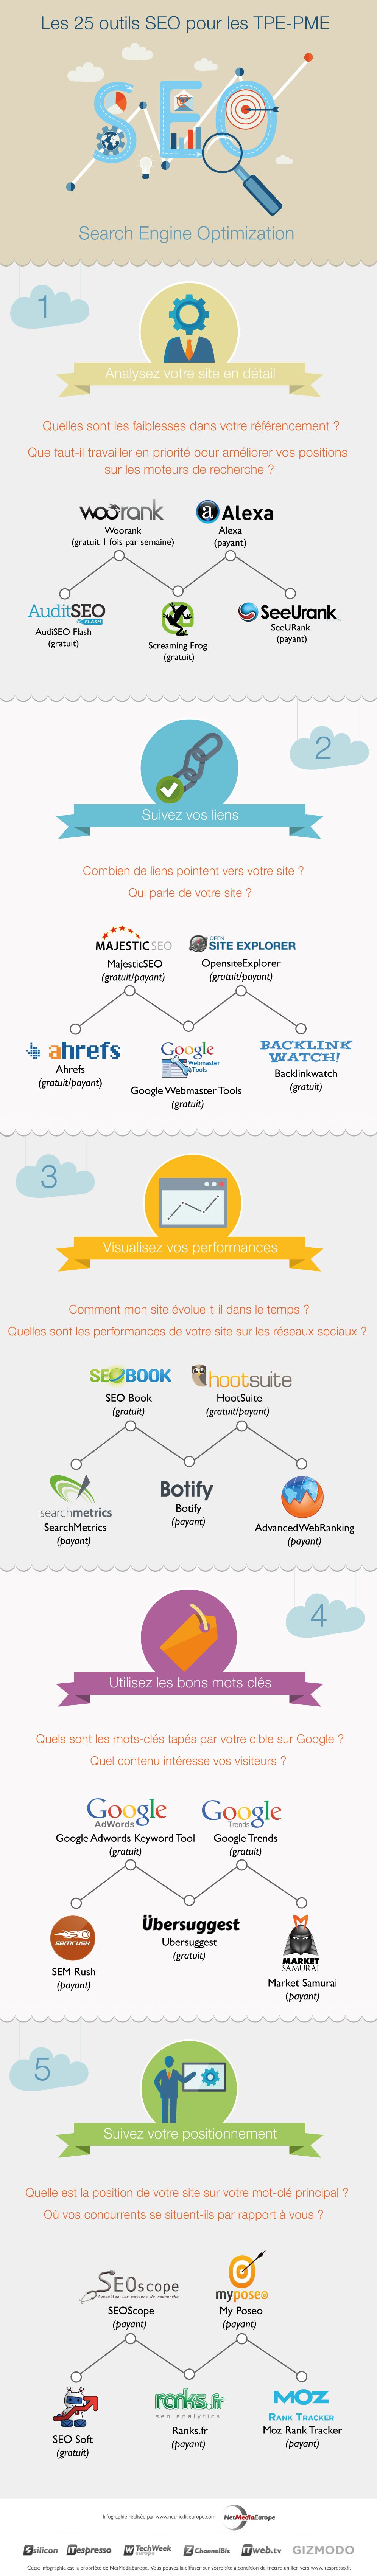 infographie-25-outils-seo